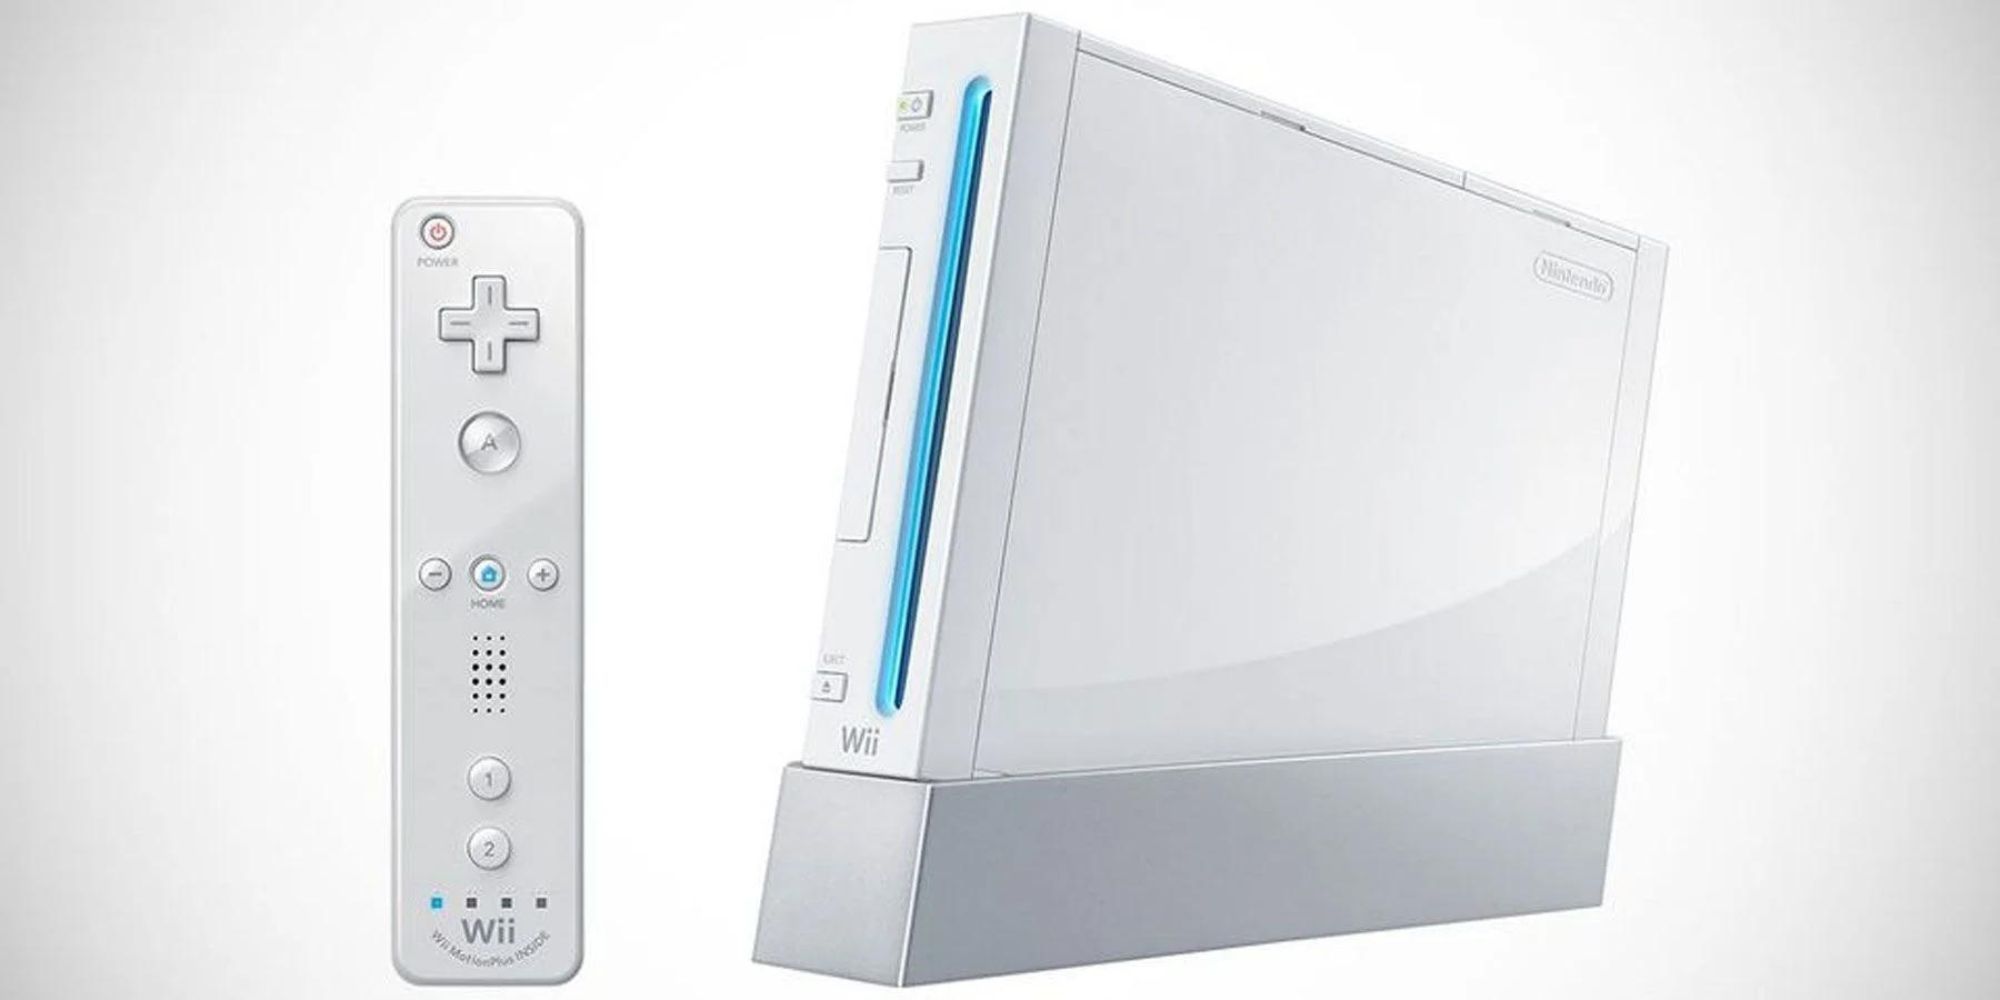 Nintendo Wii with Wii remote